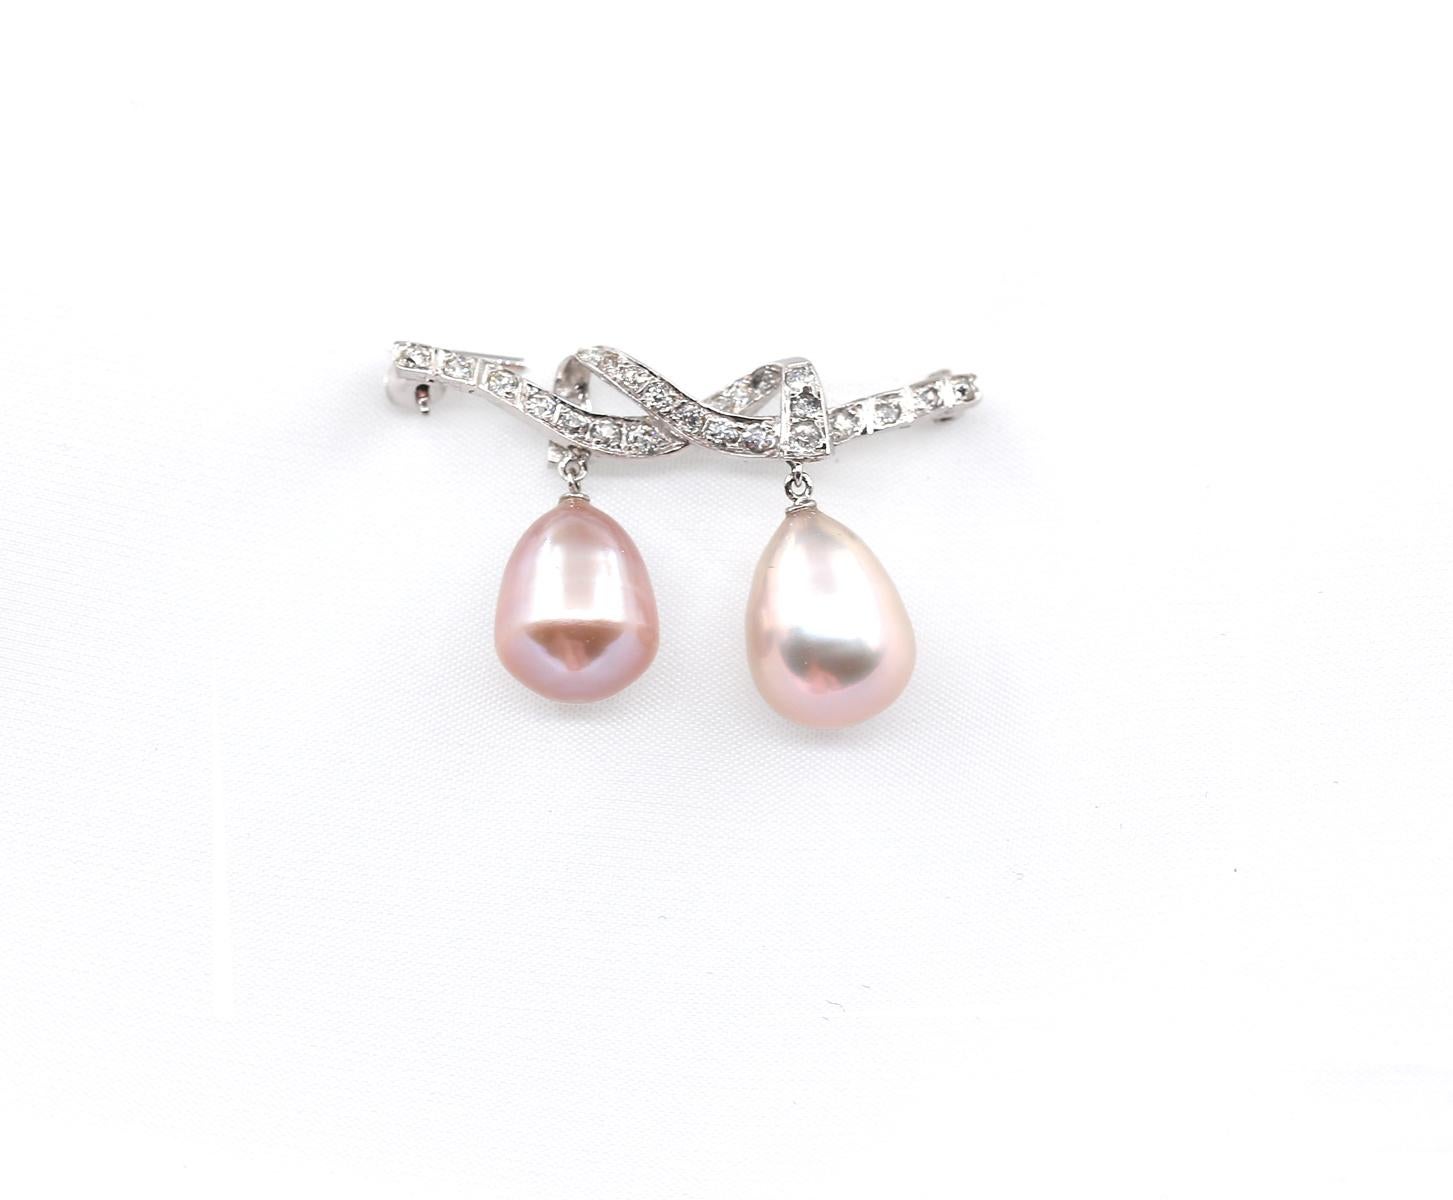 A Vintage Diamond And Pearl Brooch in 18 Karats White Gold. Designed as a lover's knot set with old cut Diamonds suspending two Pink Pearl drops. One Pearl is slightly more pink in shade, representing a woman and the other one is more of a silver